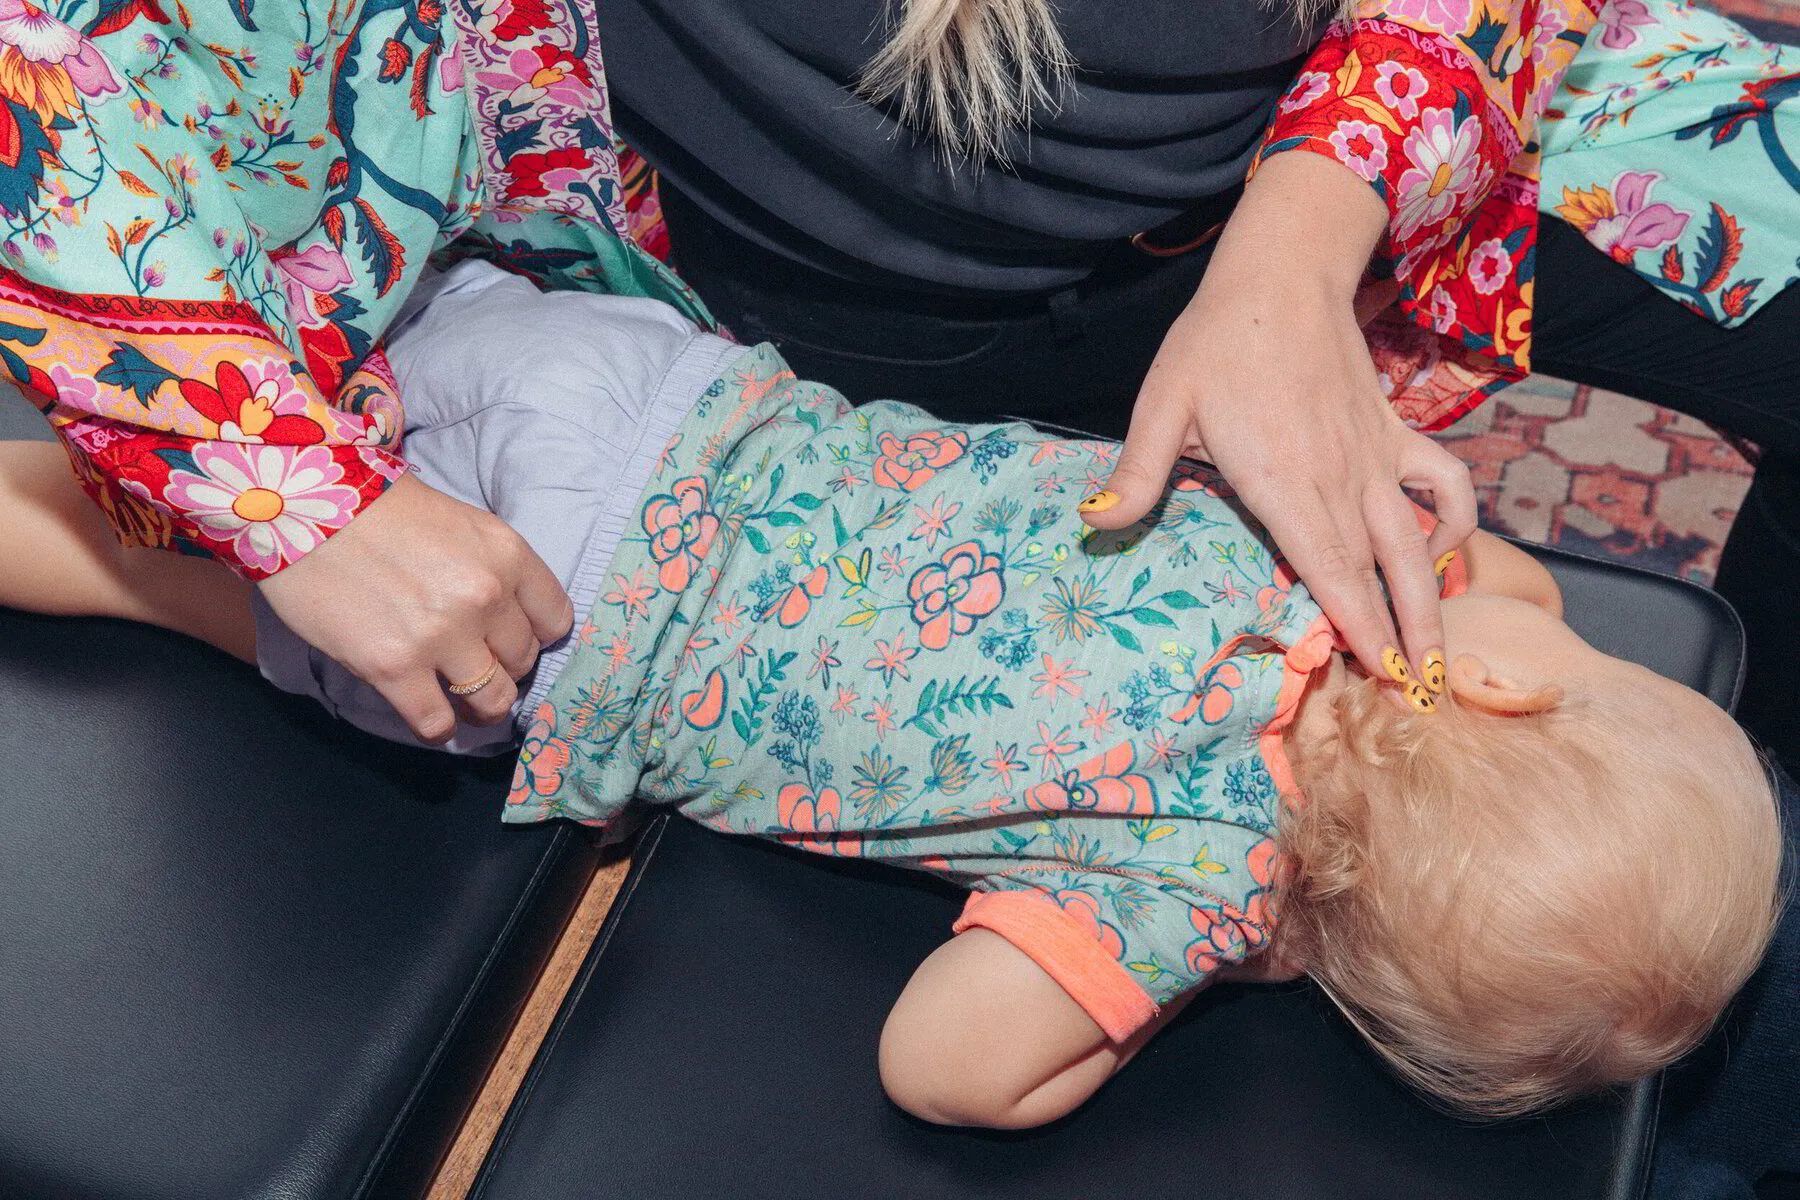 Dr. Morgan gently examines a toddler's head, showcasing her expertise and the trusting atmosphere of Truly Chiropractic